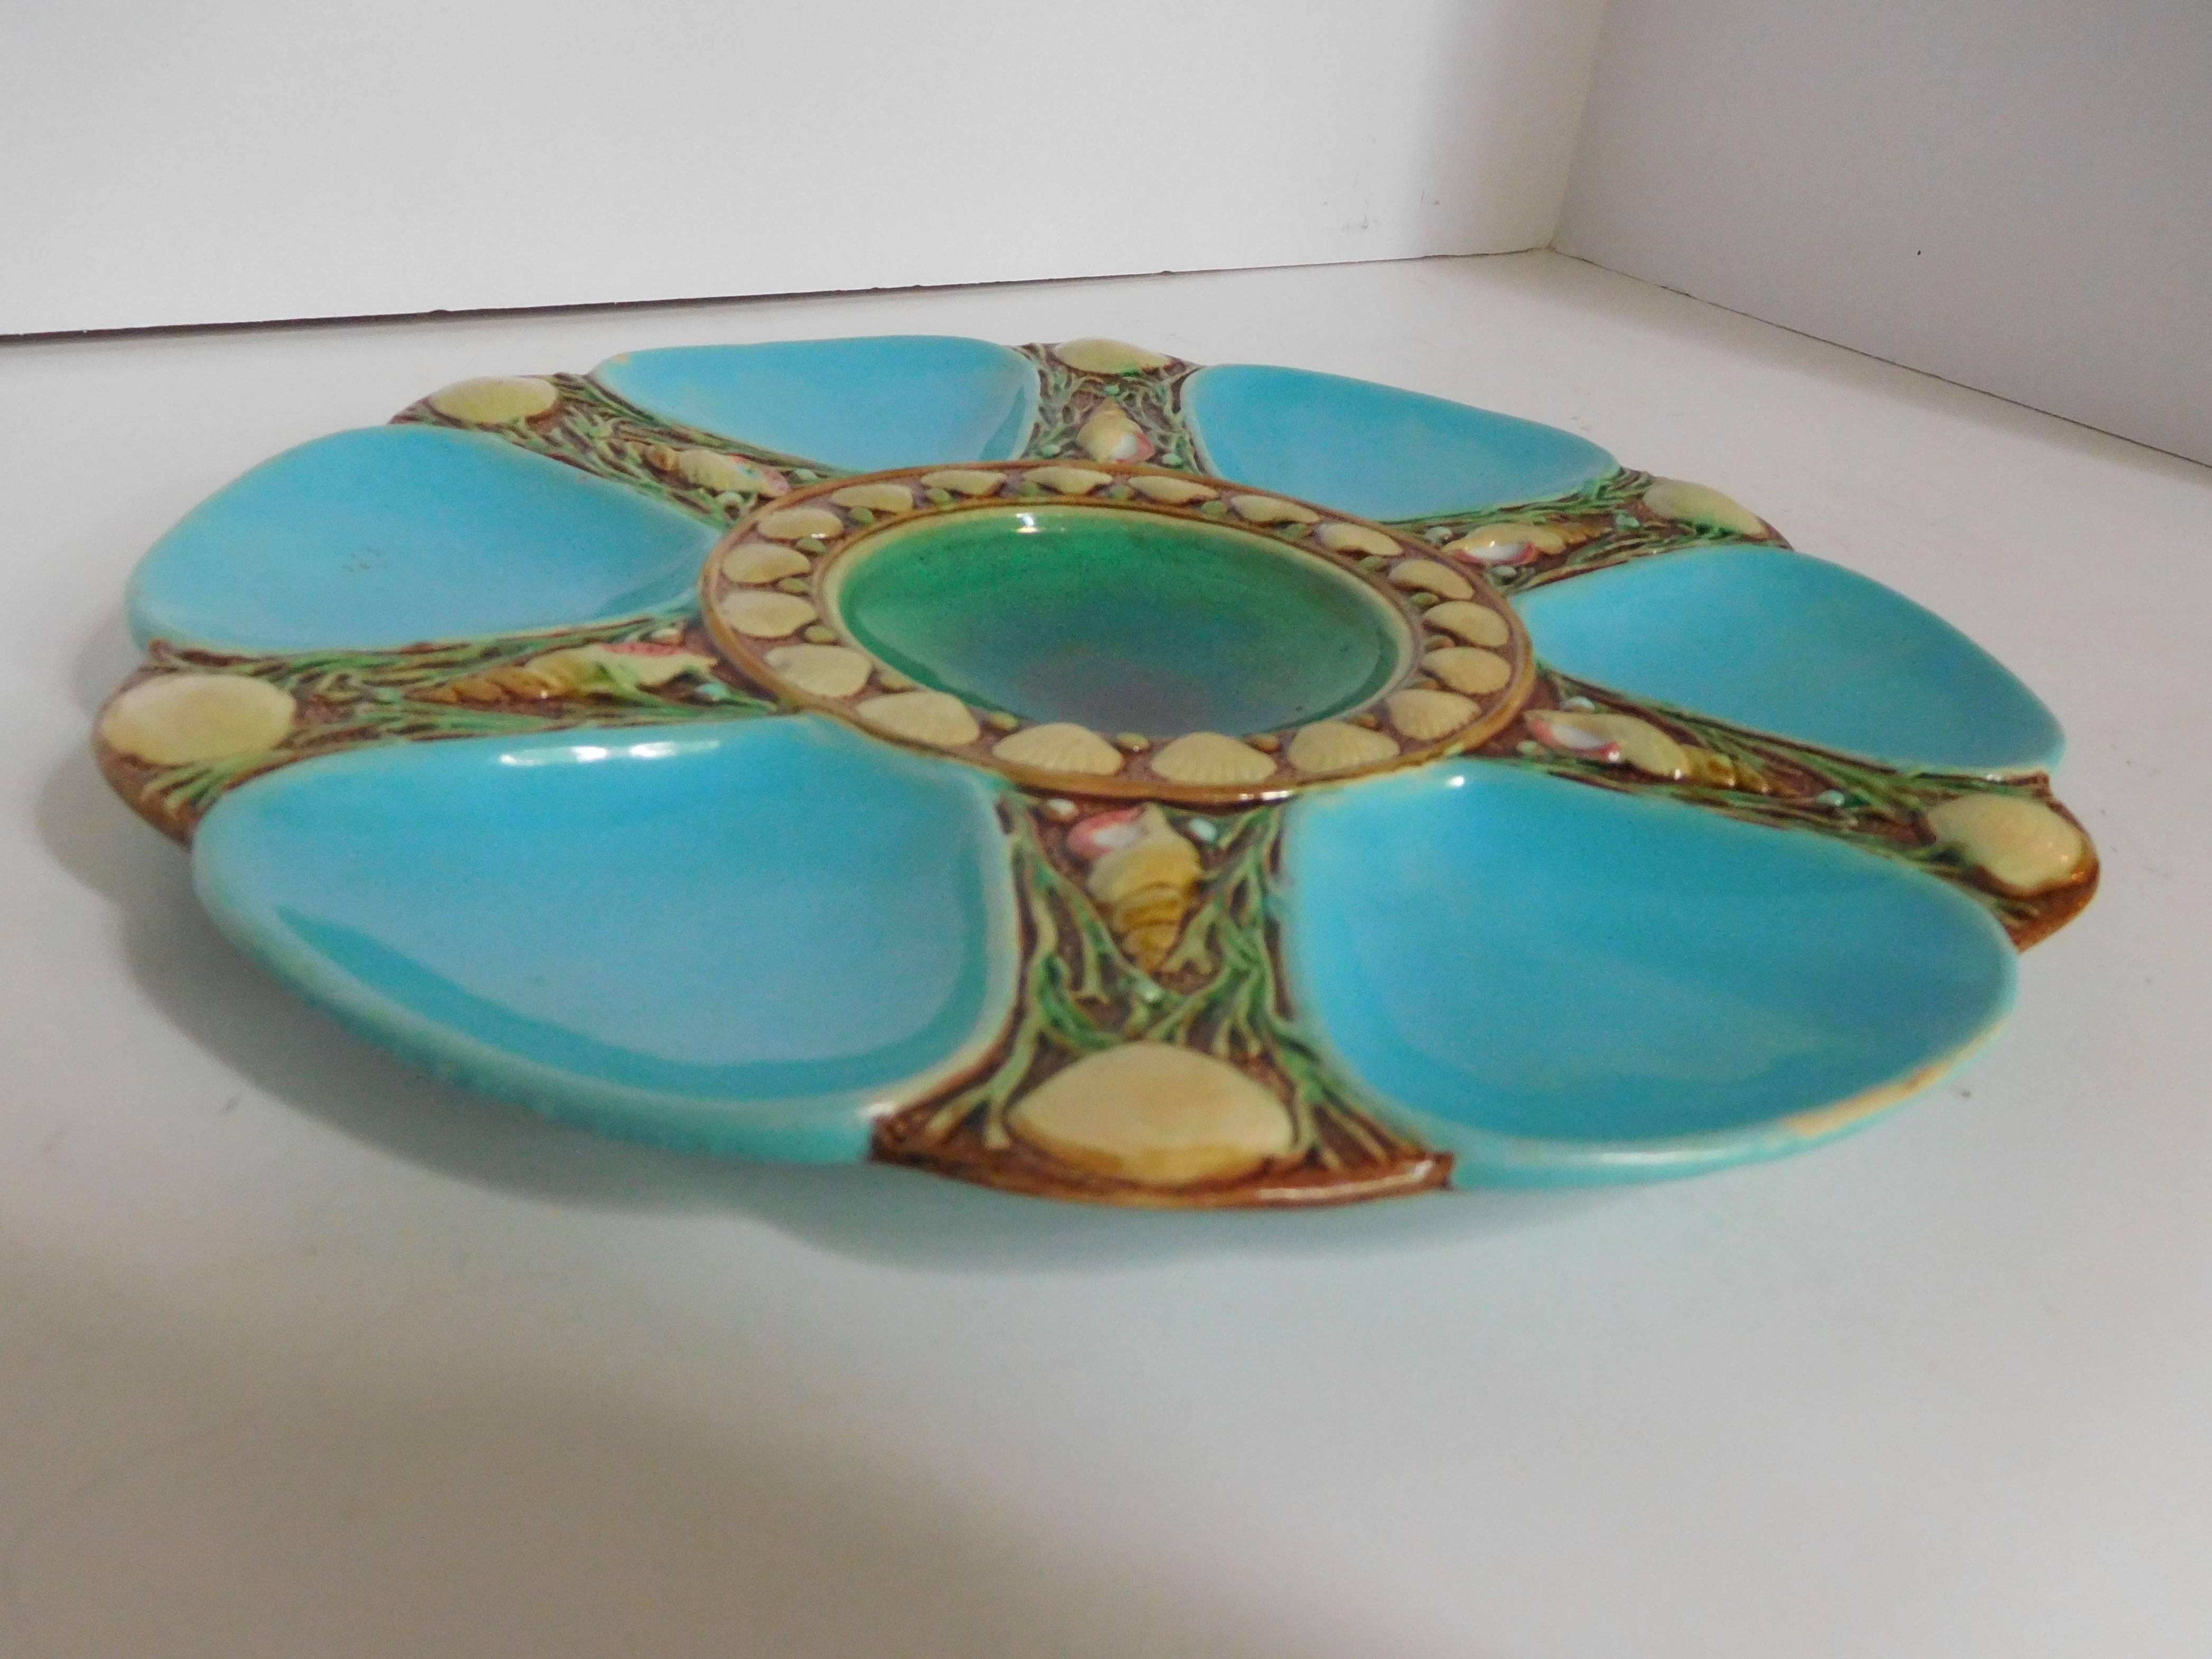 English Minton Majolica Oyster Plate in Turquoise and Green, England, 1868